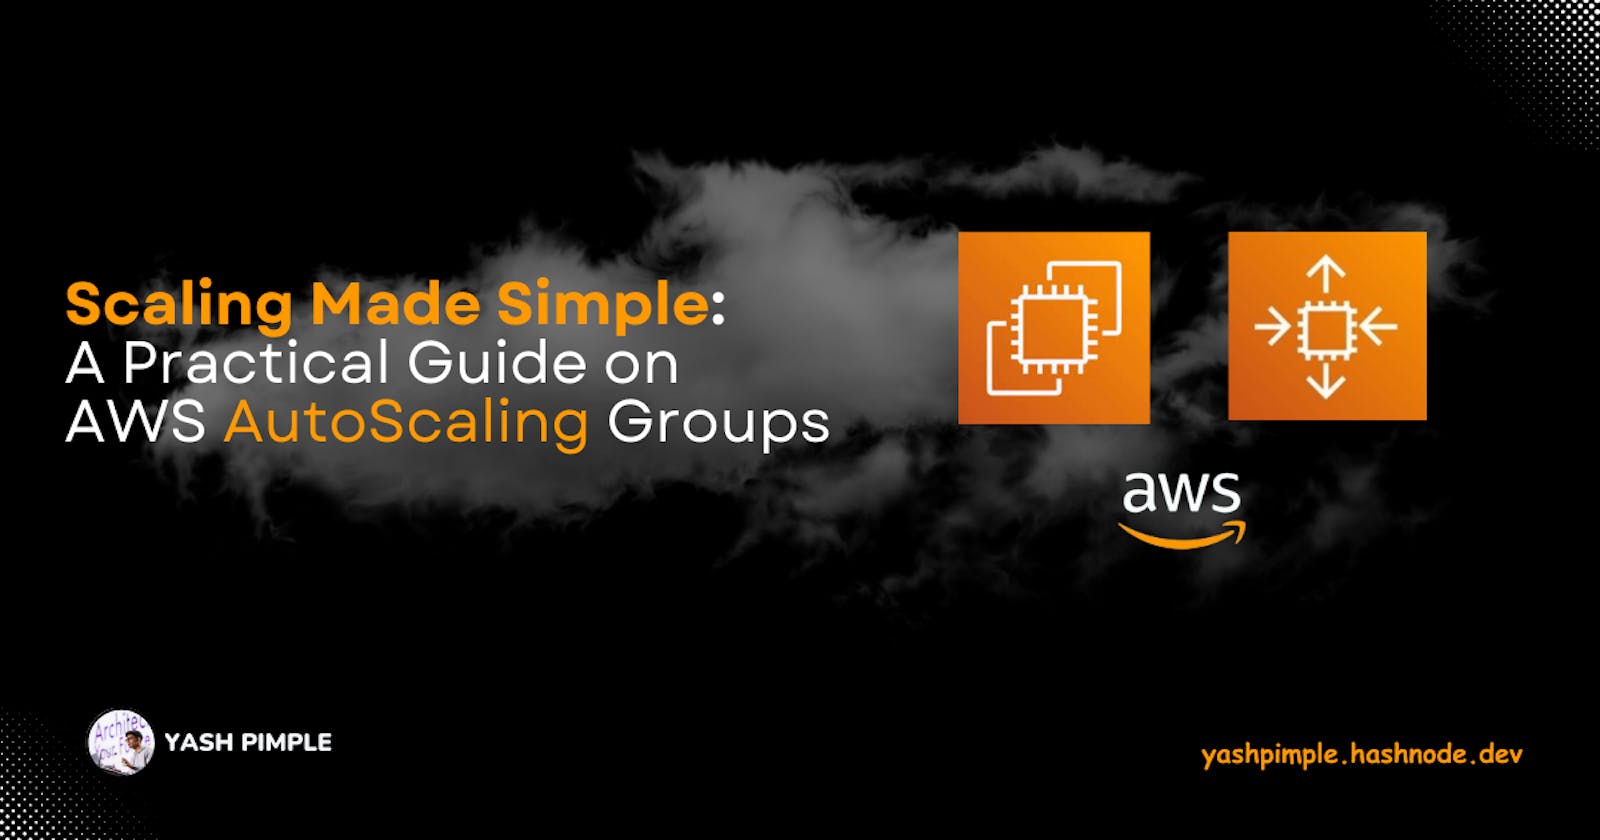 Scaling Made Simple: A Practical Guide on AWS AutoScaling Groups